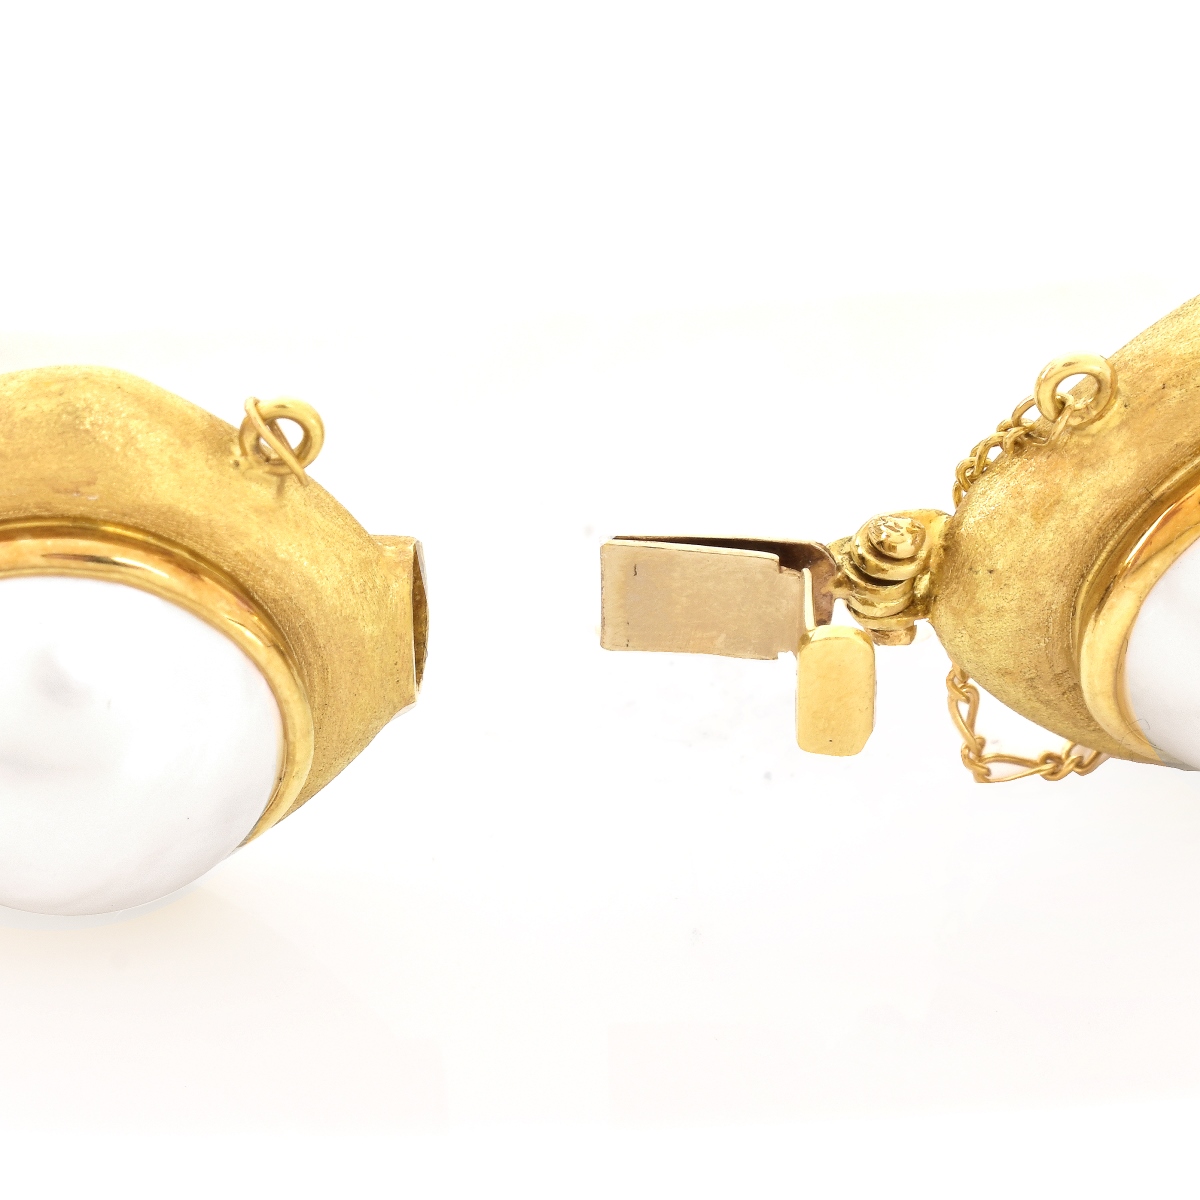 Italian Mabe Pearl and 18K Gold Bracelet